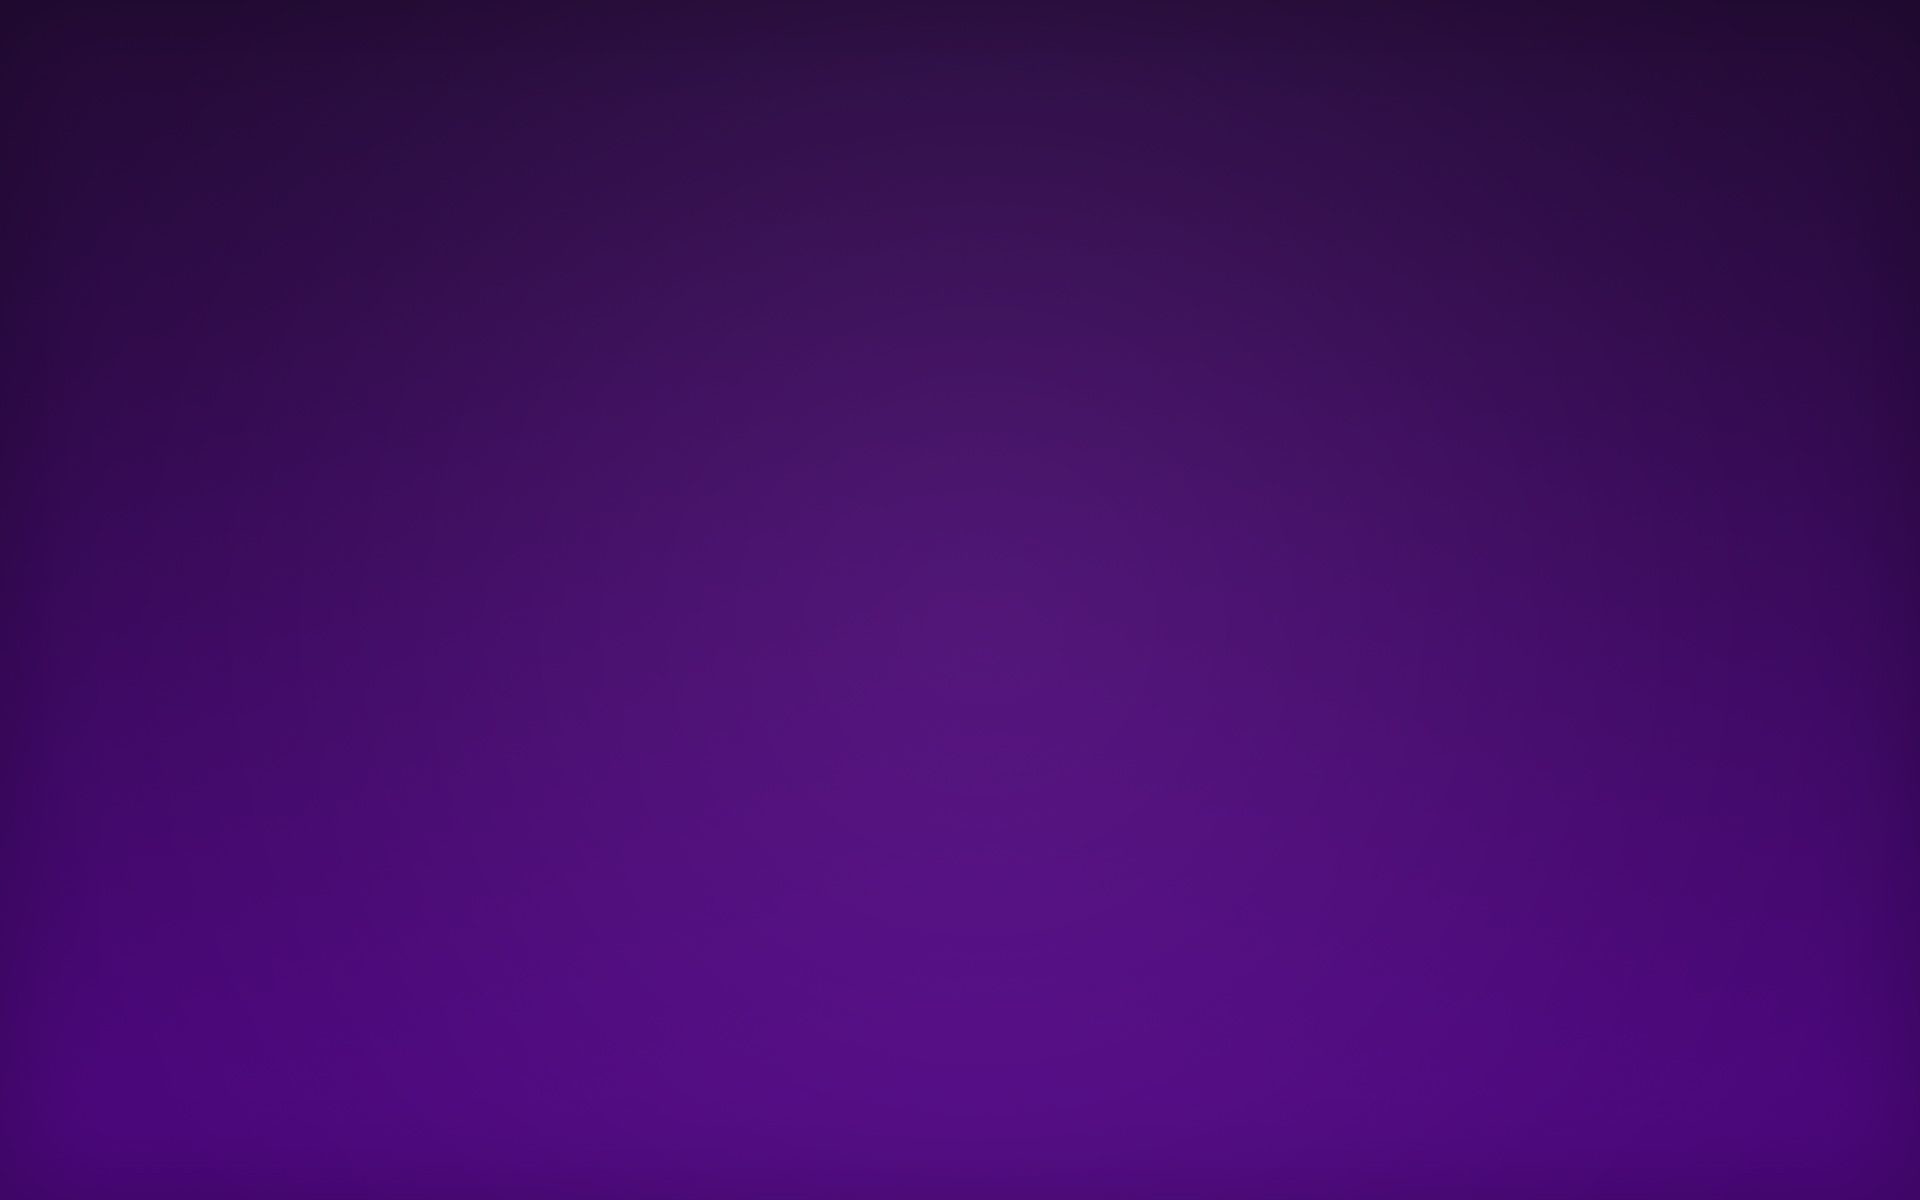 1920x1200 Wallpapers For > Plain Dark Purple Backgrounds #9555